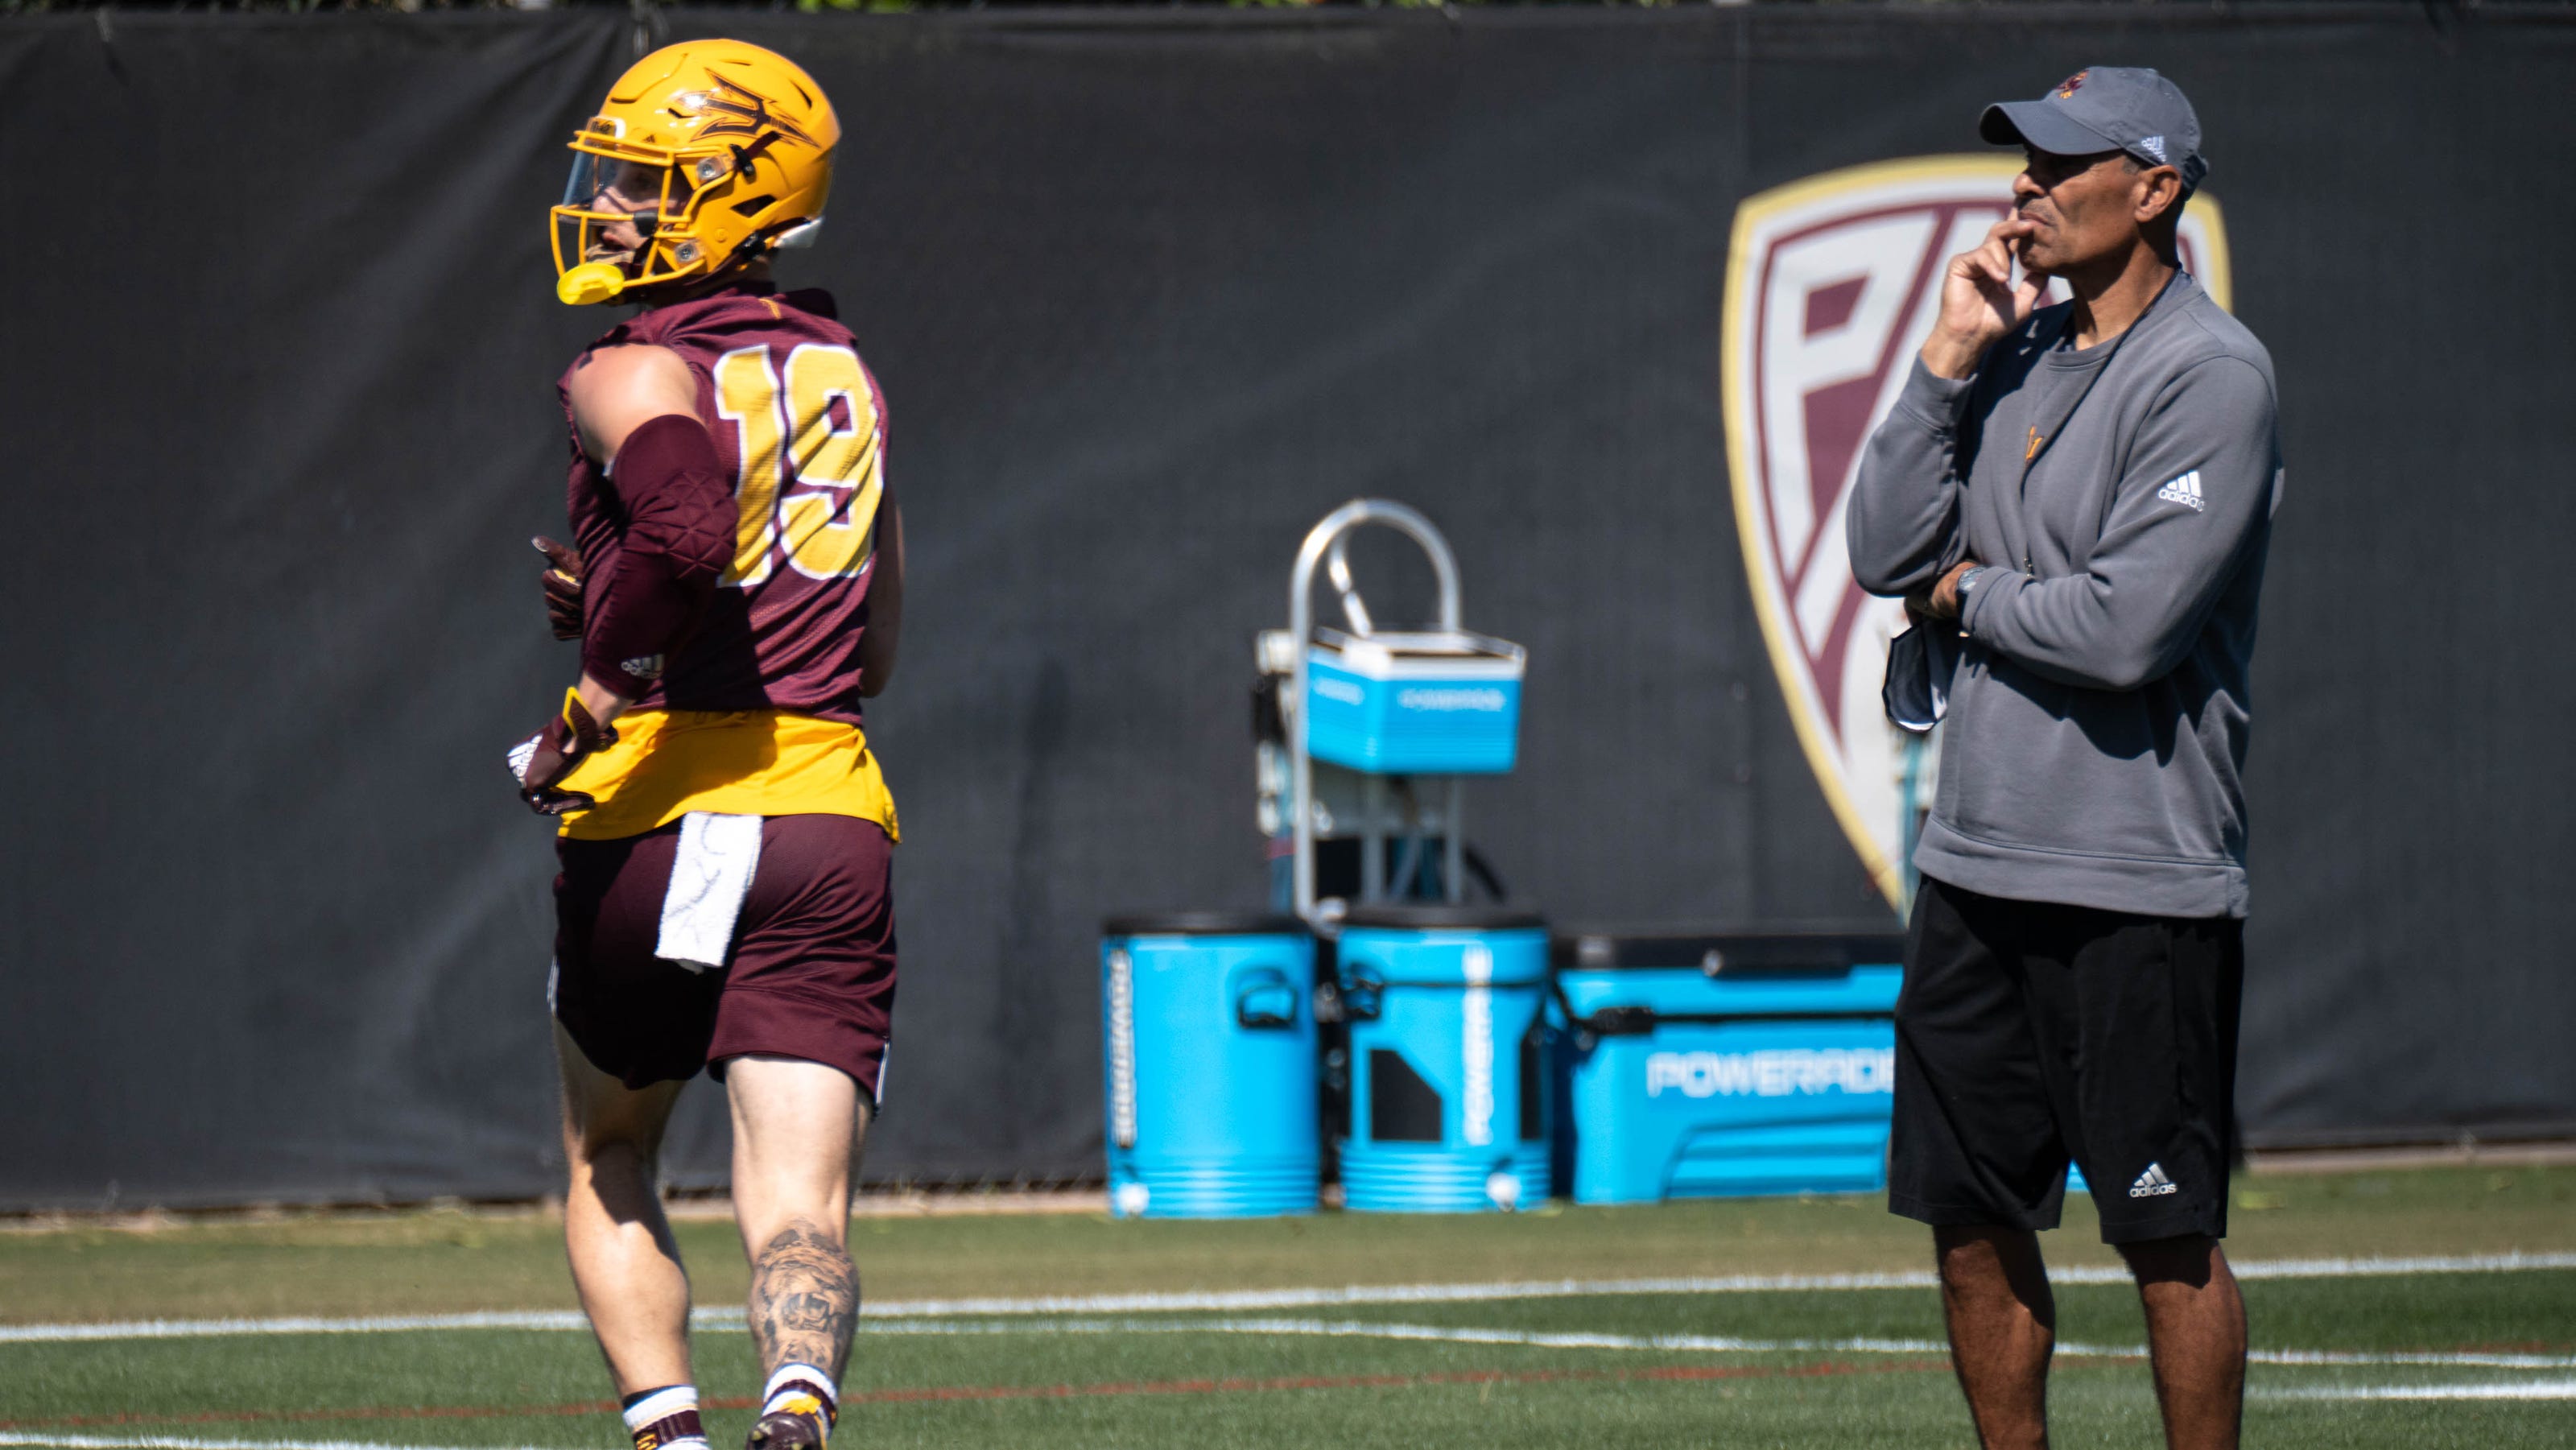 ASU football hopes to find passing game under new system